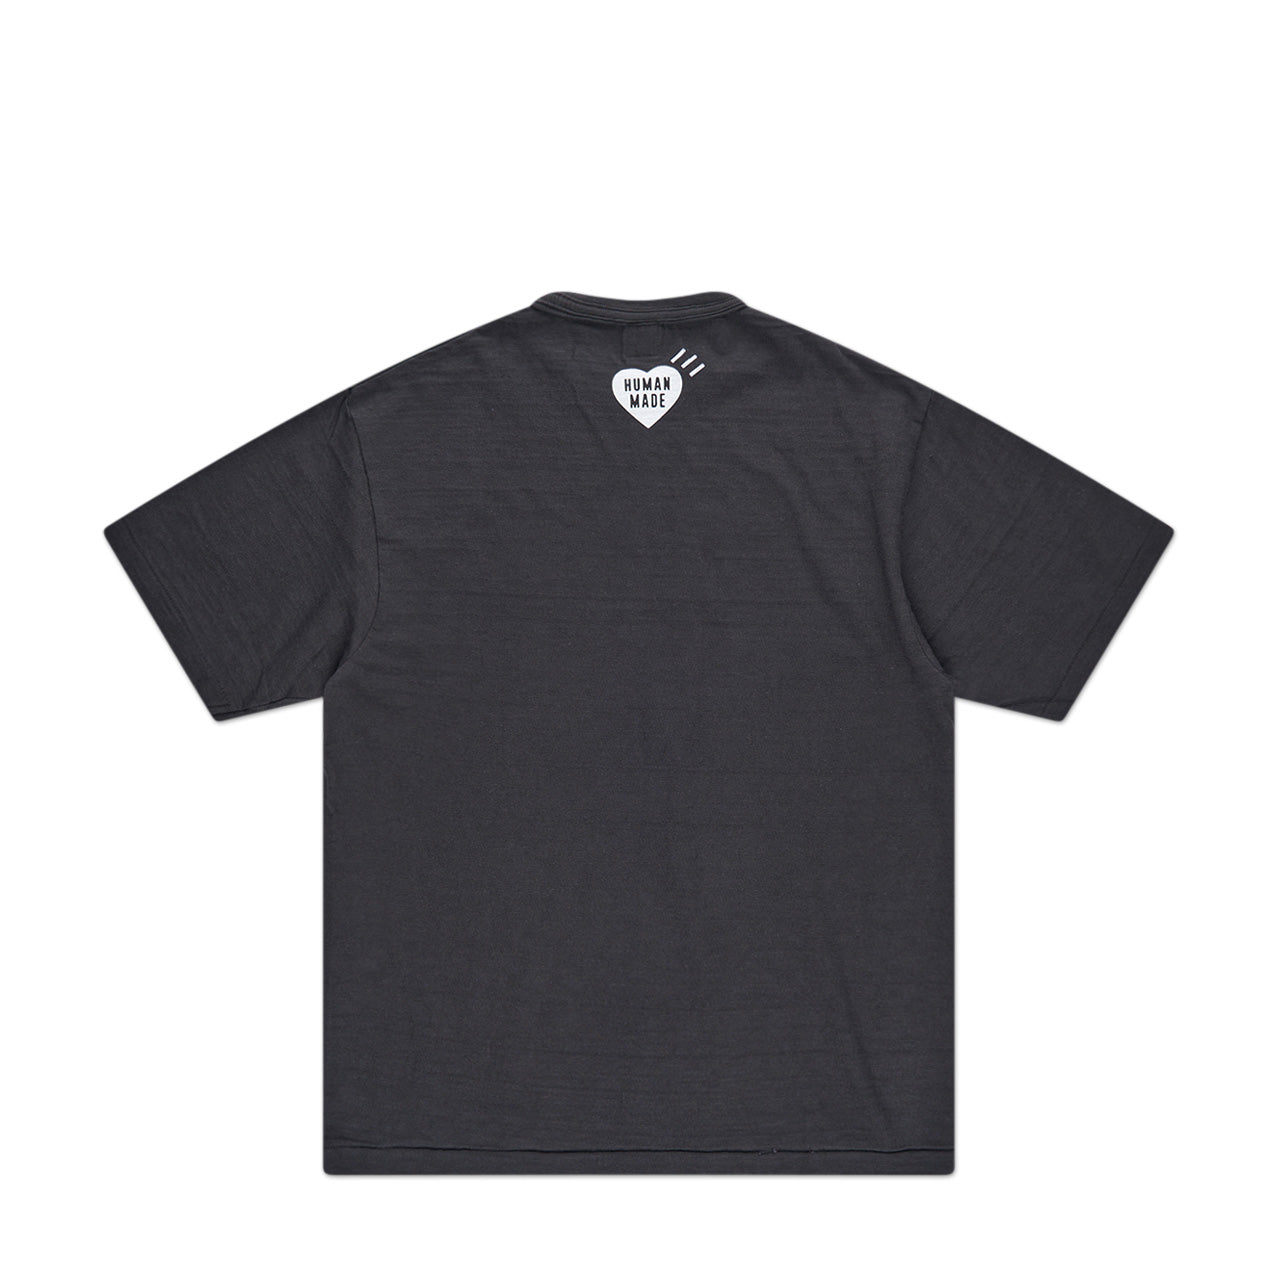 human made graphic t-shirt (black) - a.plus store